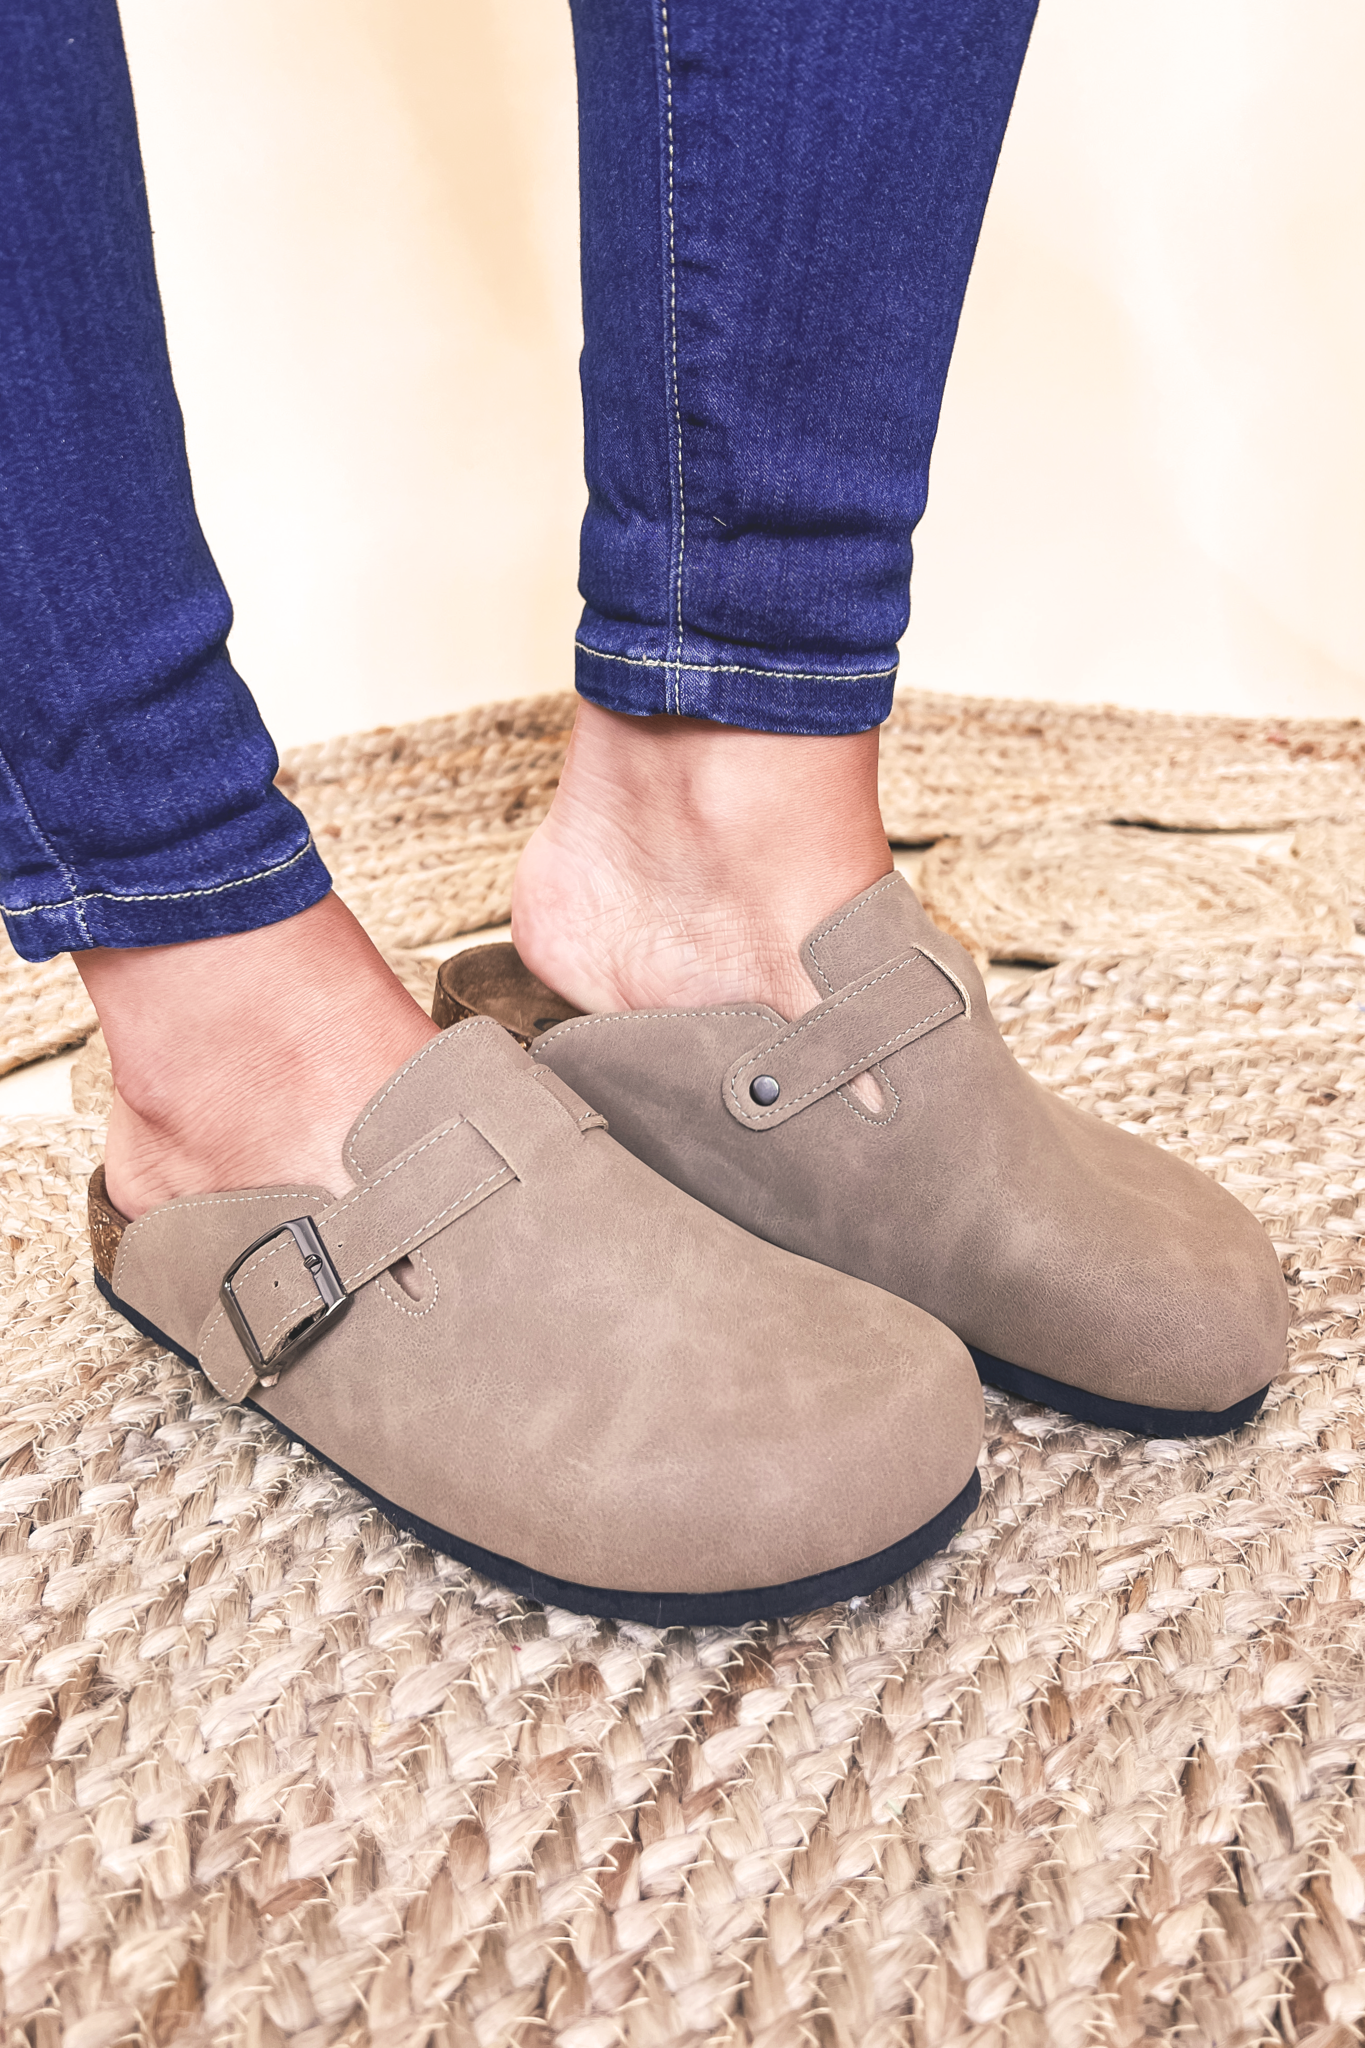 The Bria Slip On Flat Clog Mule in Taupe